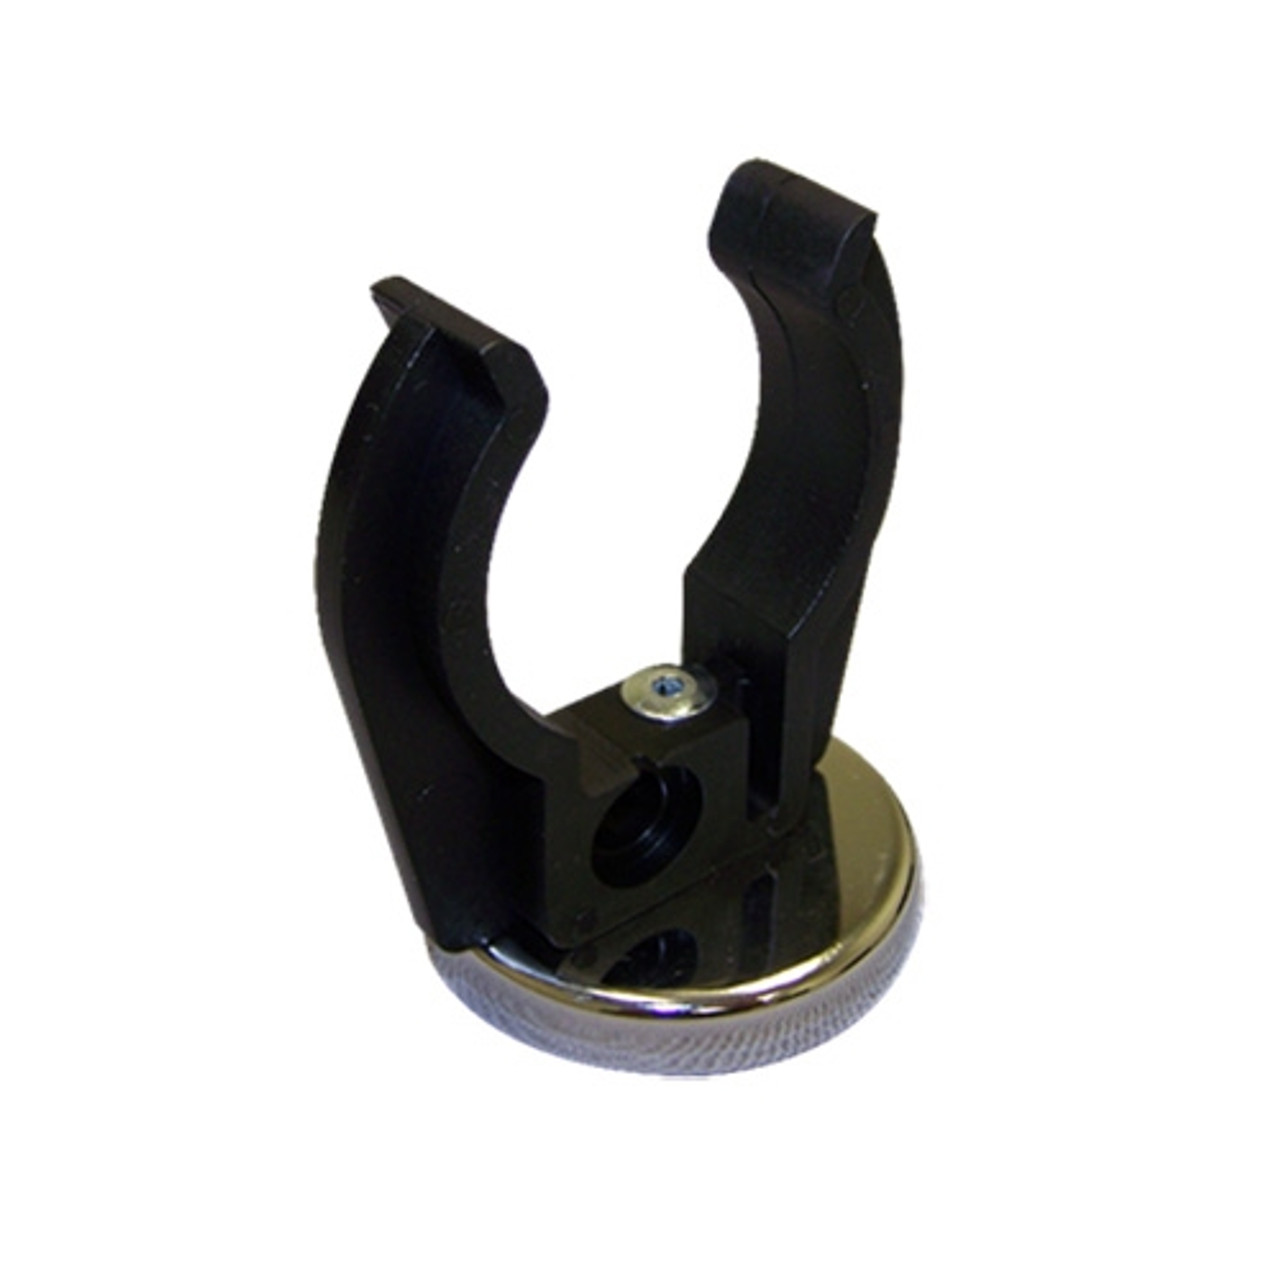 Saftlite 5000-1030 Magmount, Style "B", Mount with Magnet